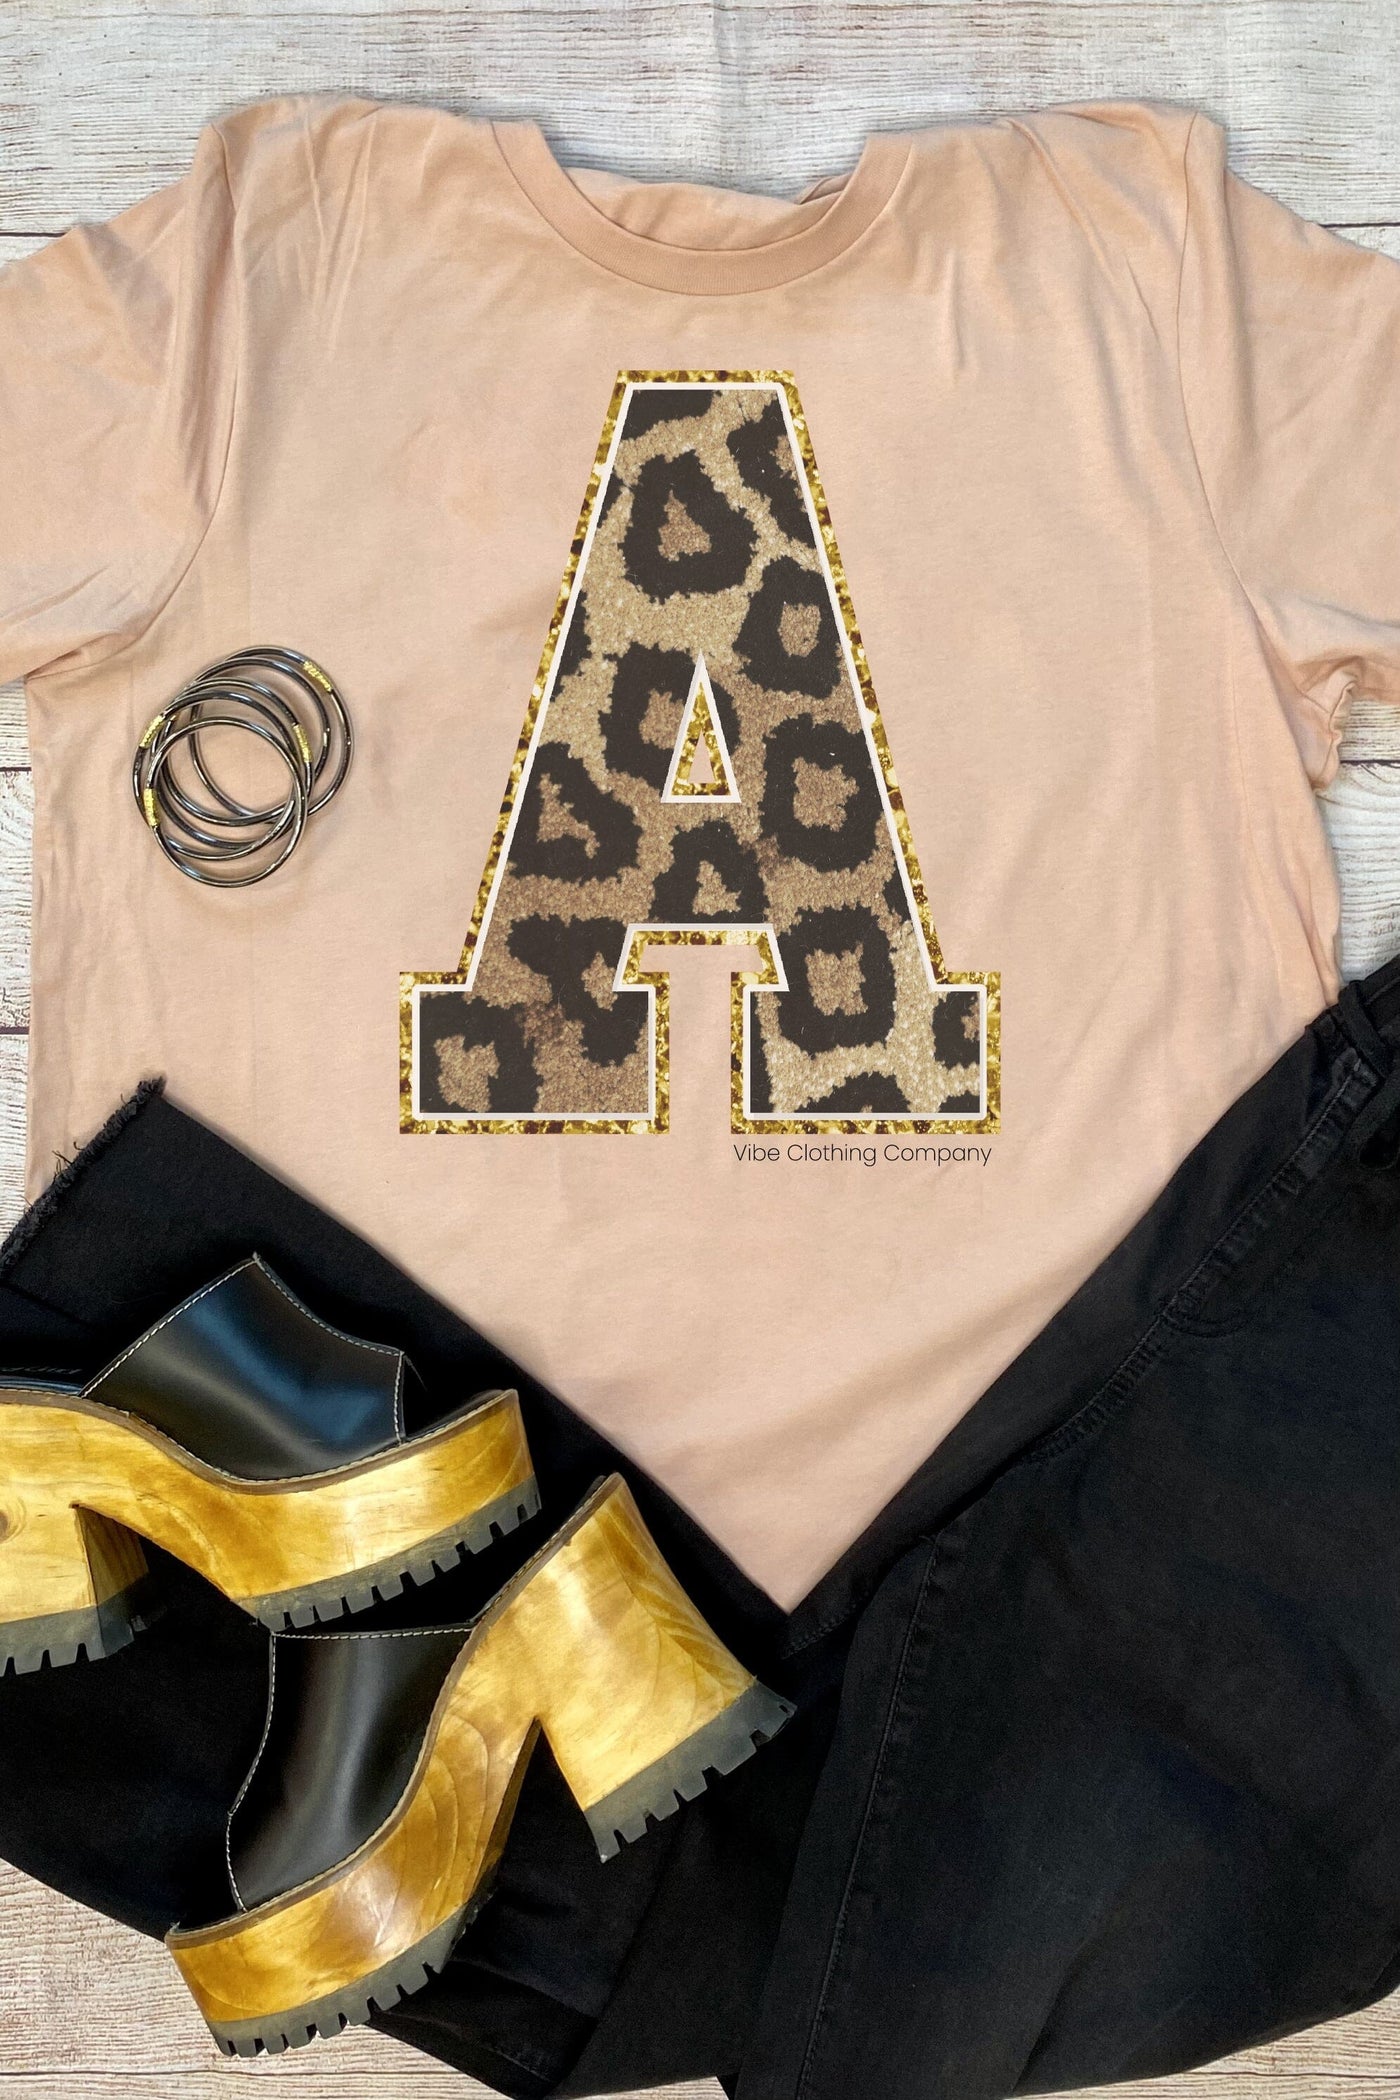 Initials A-M: Blush Graphic Tee, graphic tees VCC Small A 